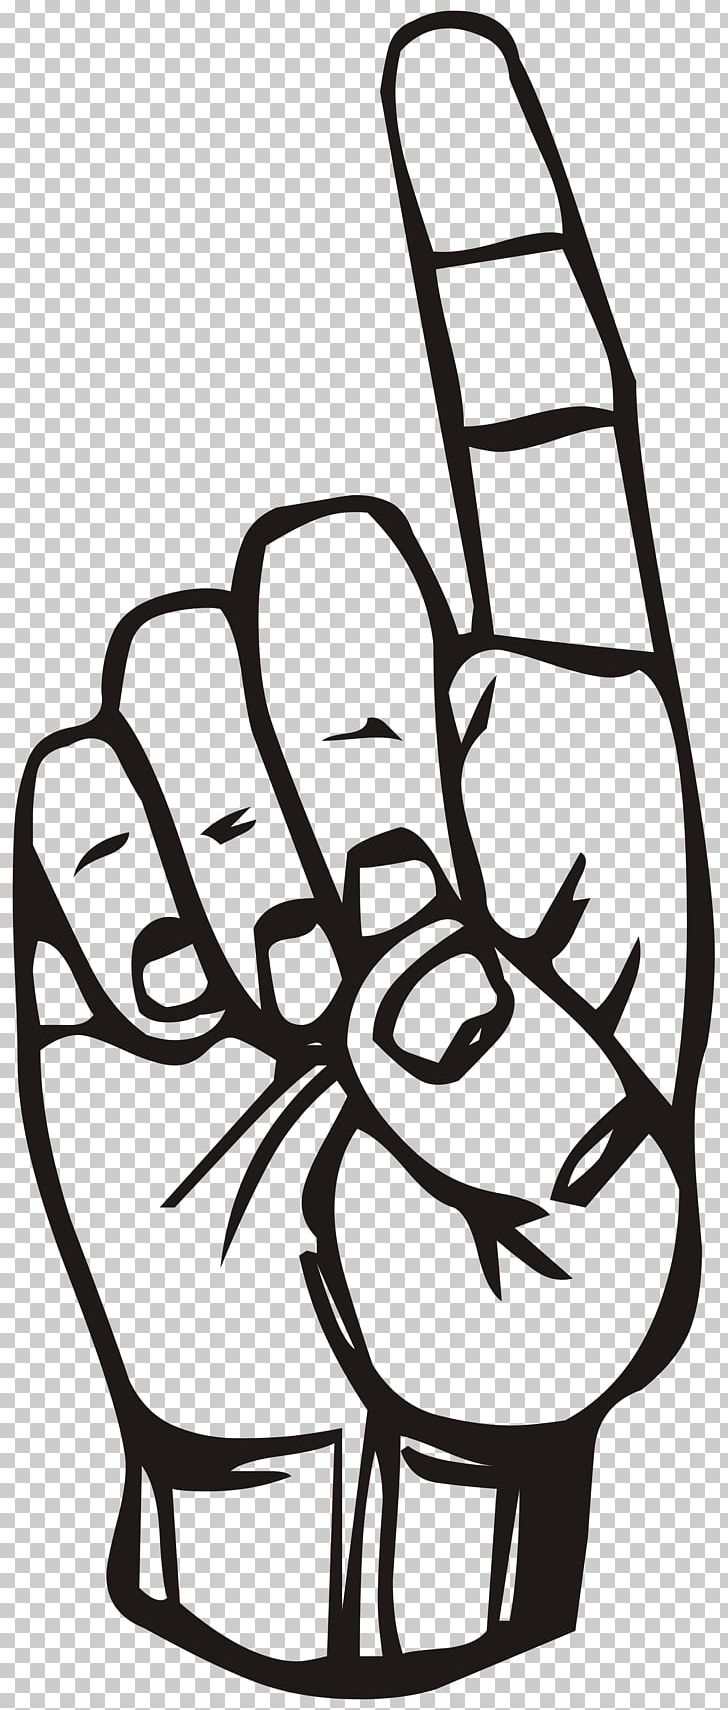 American Sign Language Fingerspelling Baby Sign Language PNG, Clipart, American Sign Language, Arm, Baby Sign Language, Black, Black And White Free PNG Download